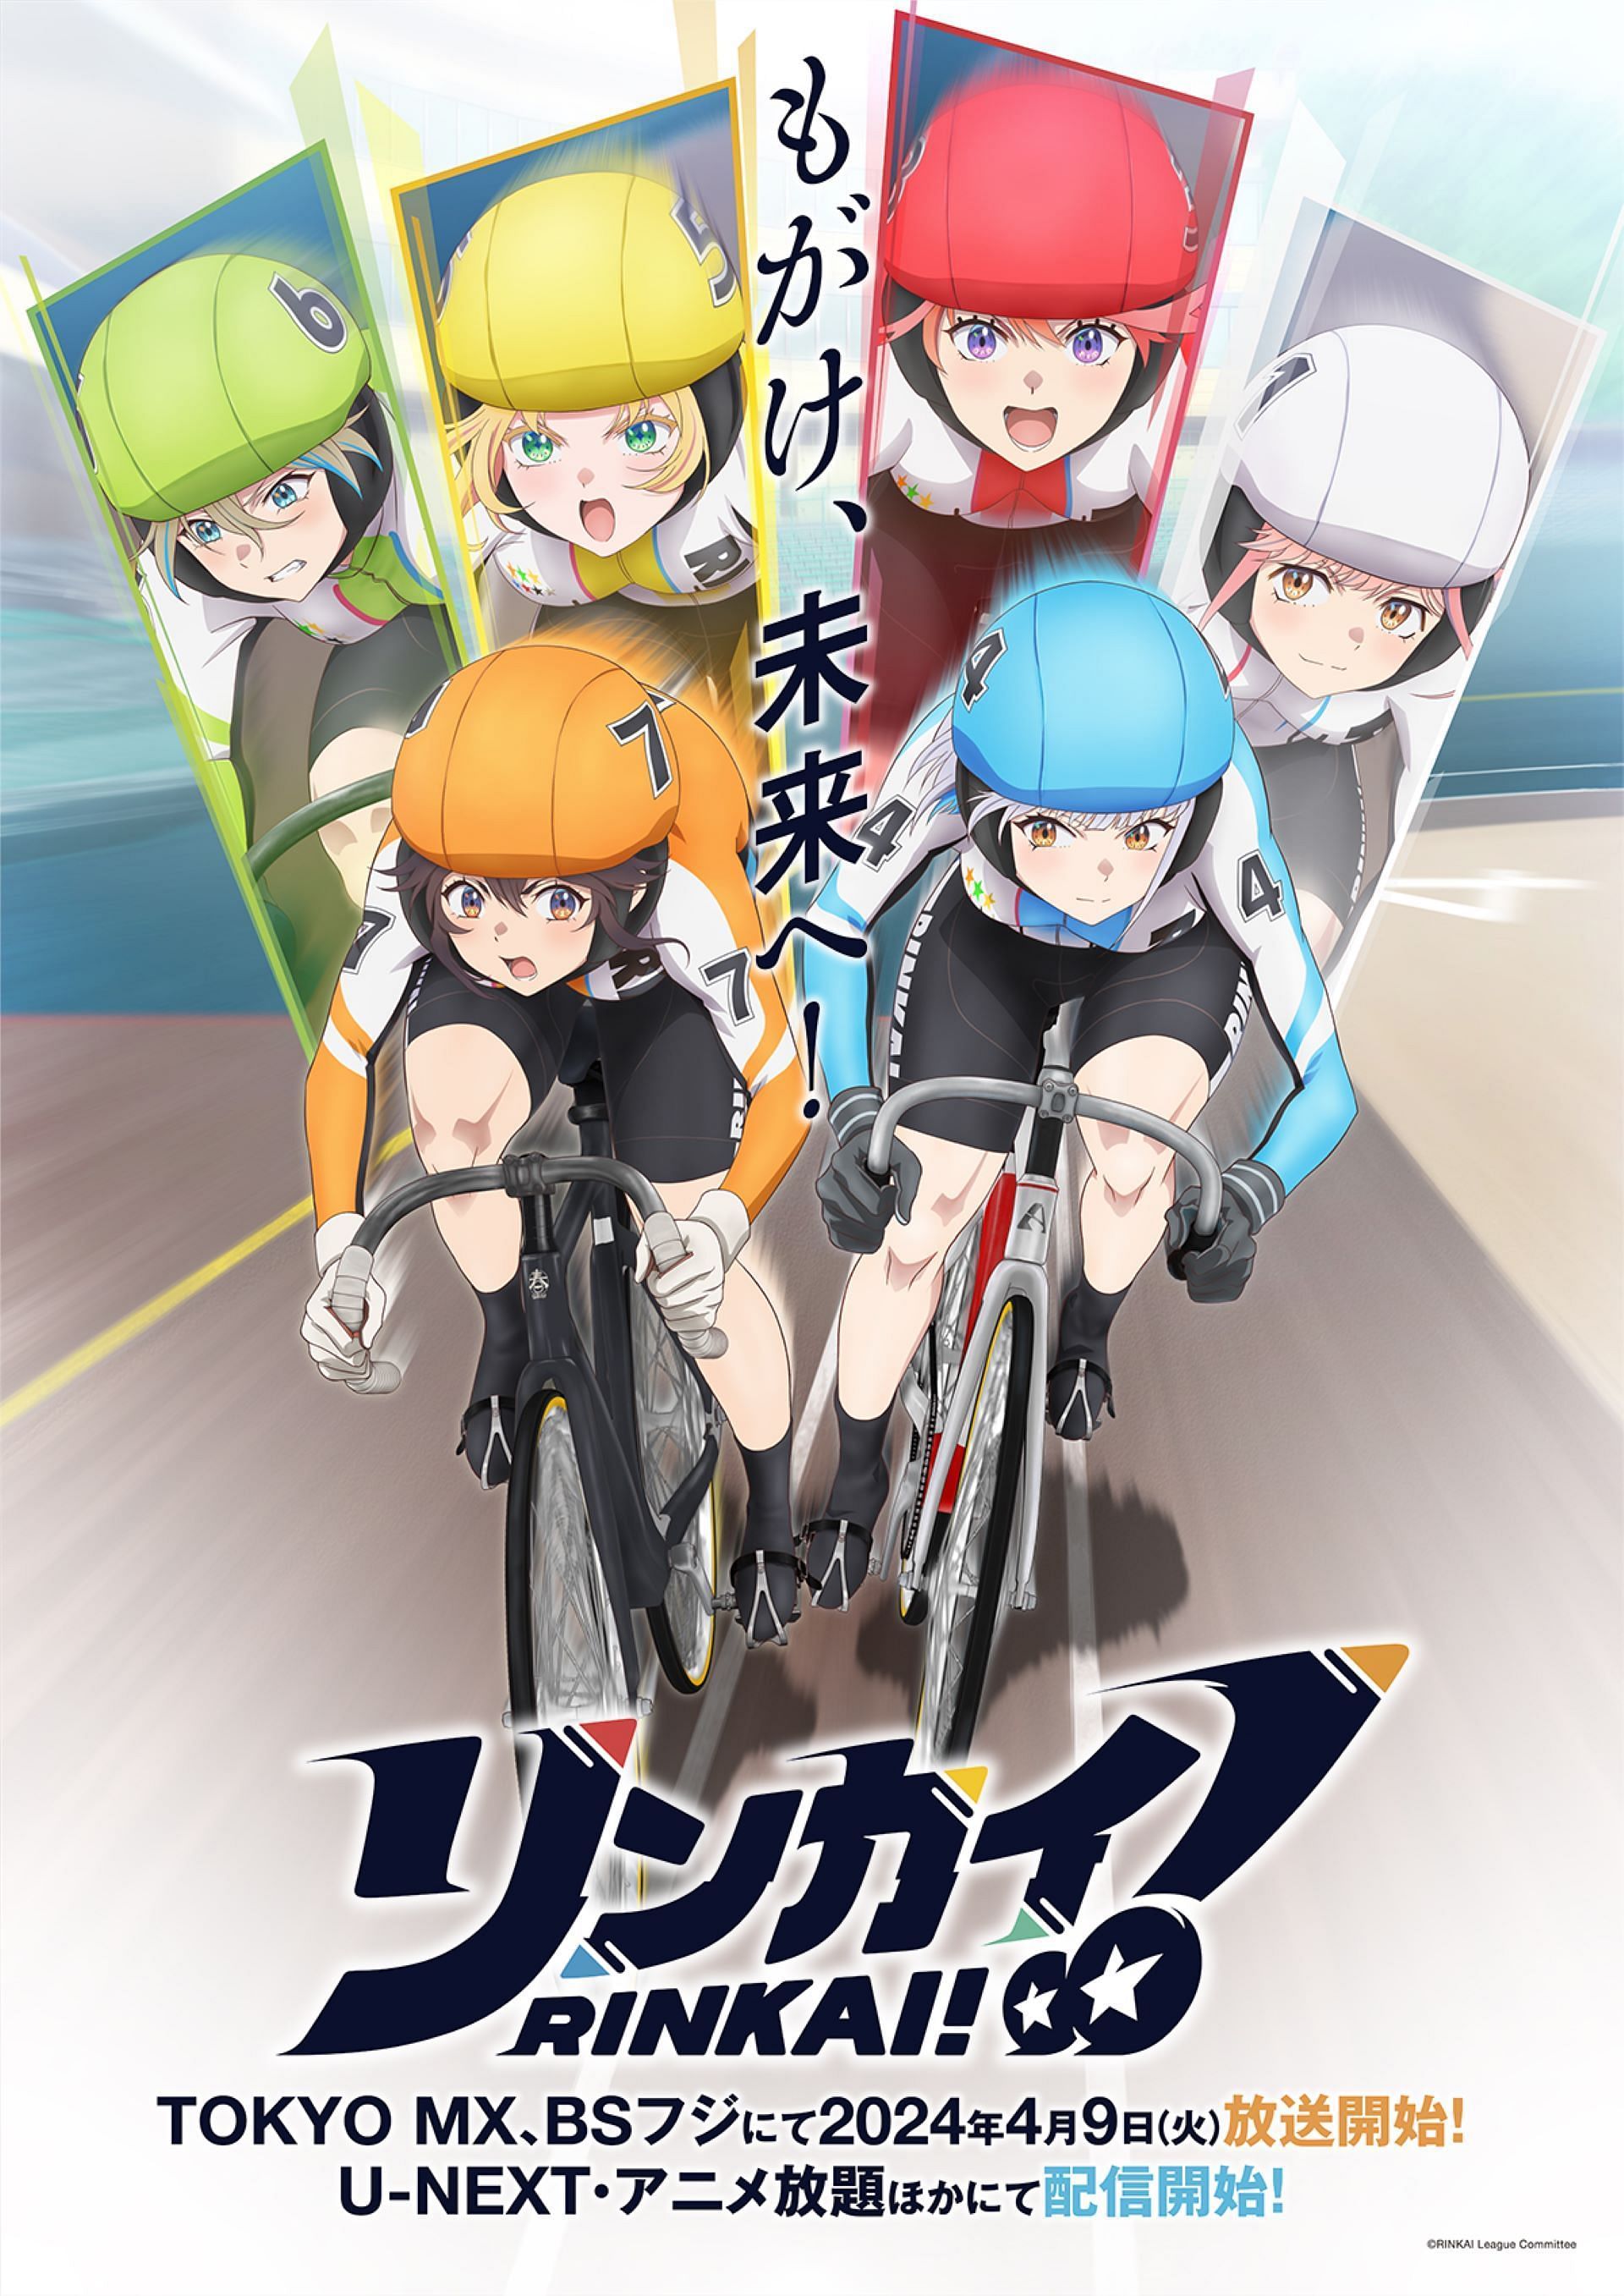 CapoVelo.com - The Peloton and Anime Come Together in this Groovy Animation